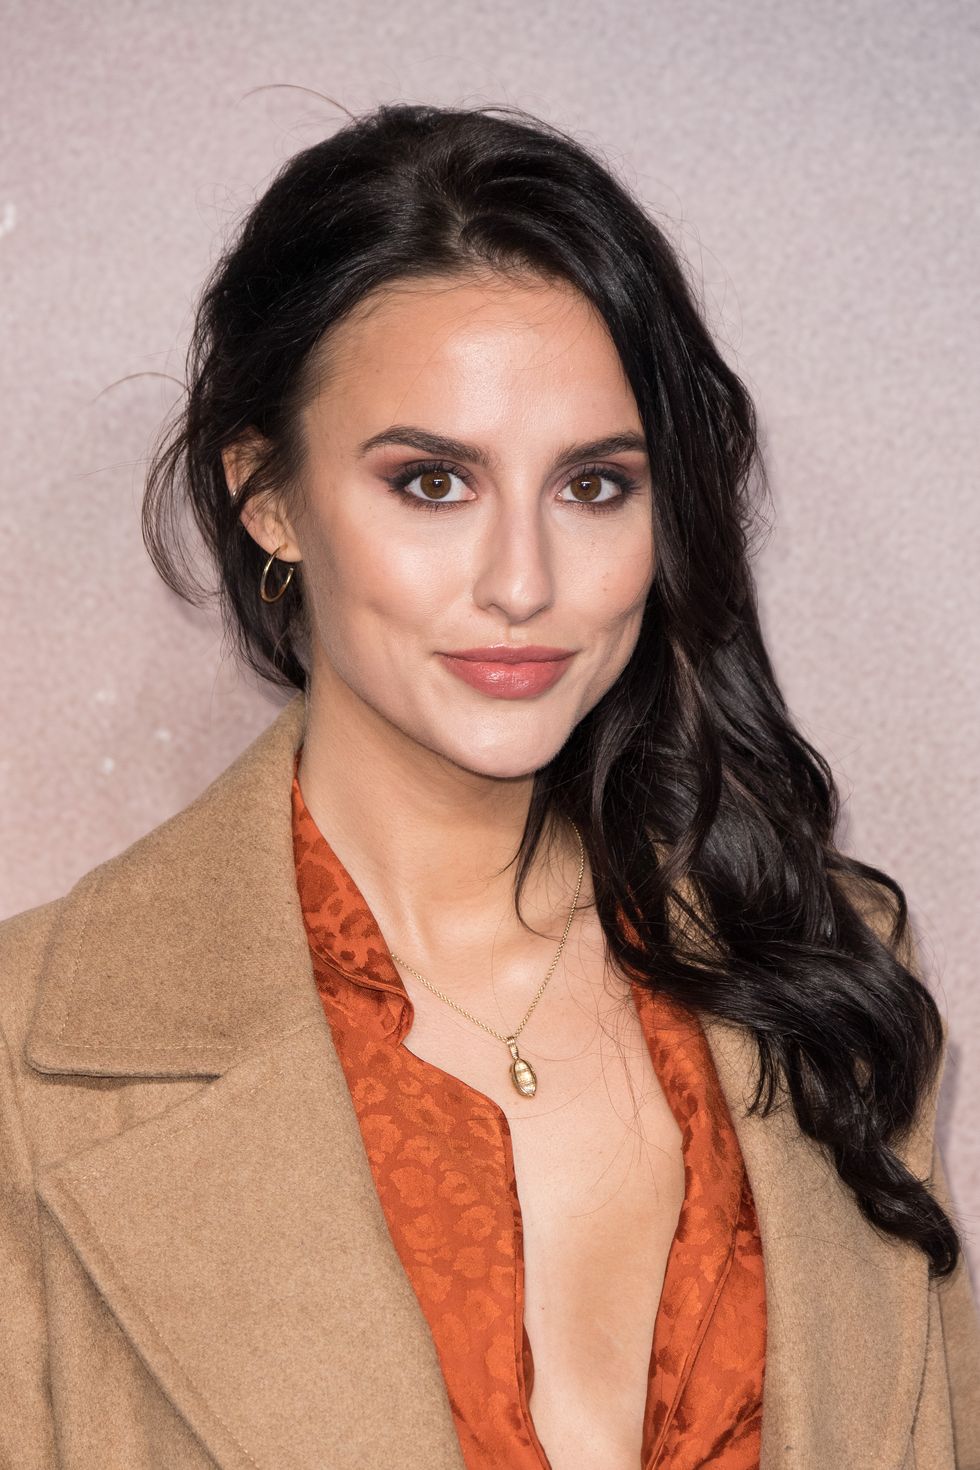 lucy watson attends aquaman premiere